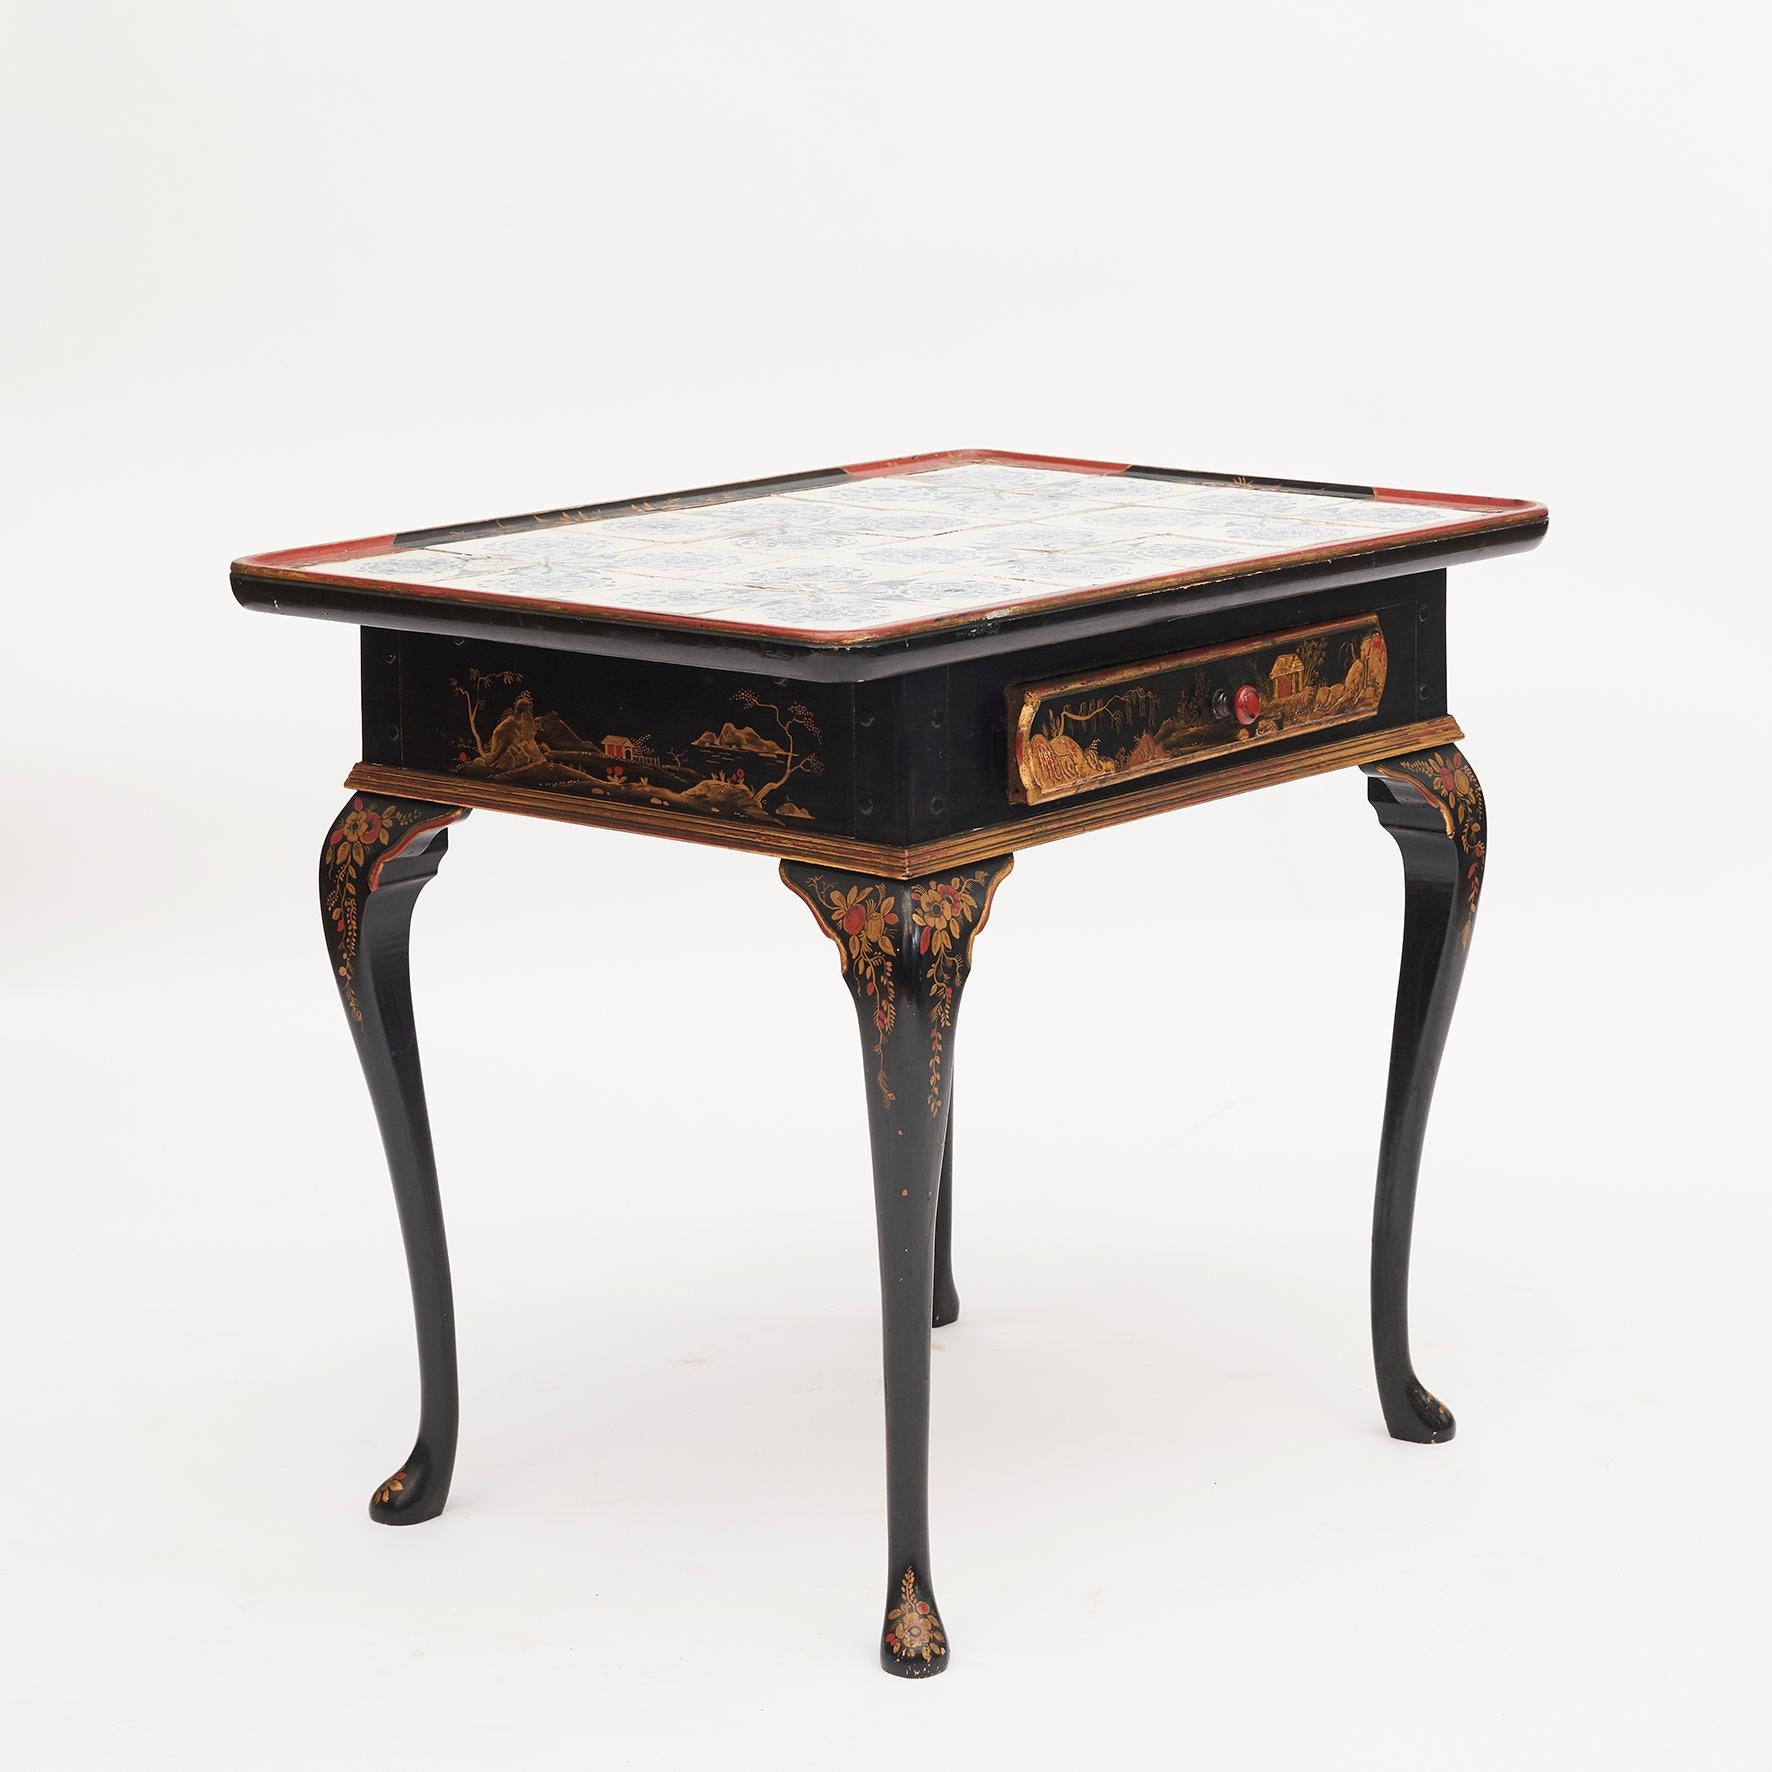 Painted Danish Rococo Tile-Top Table with Chinese Motifs